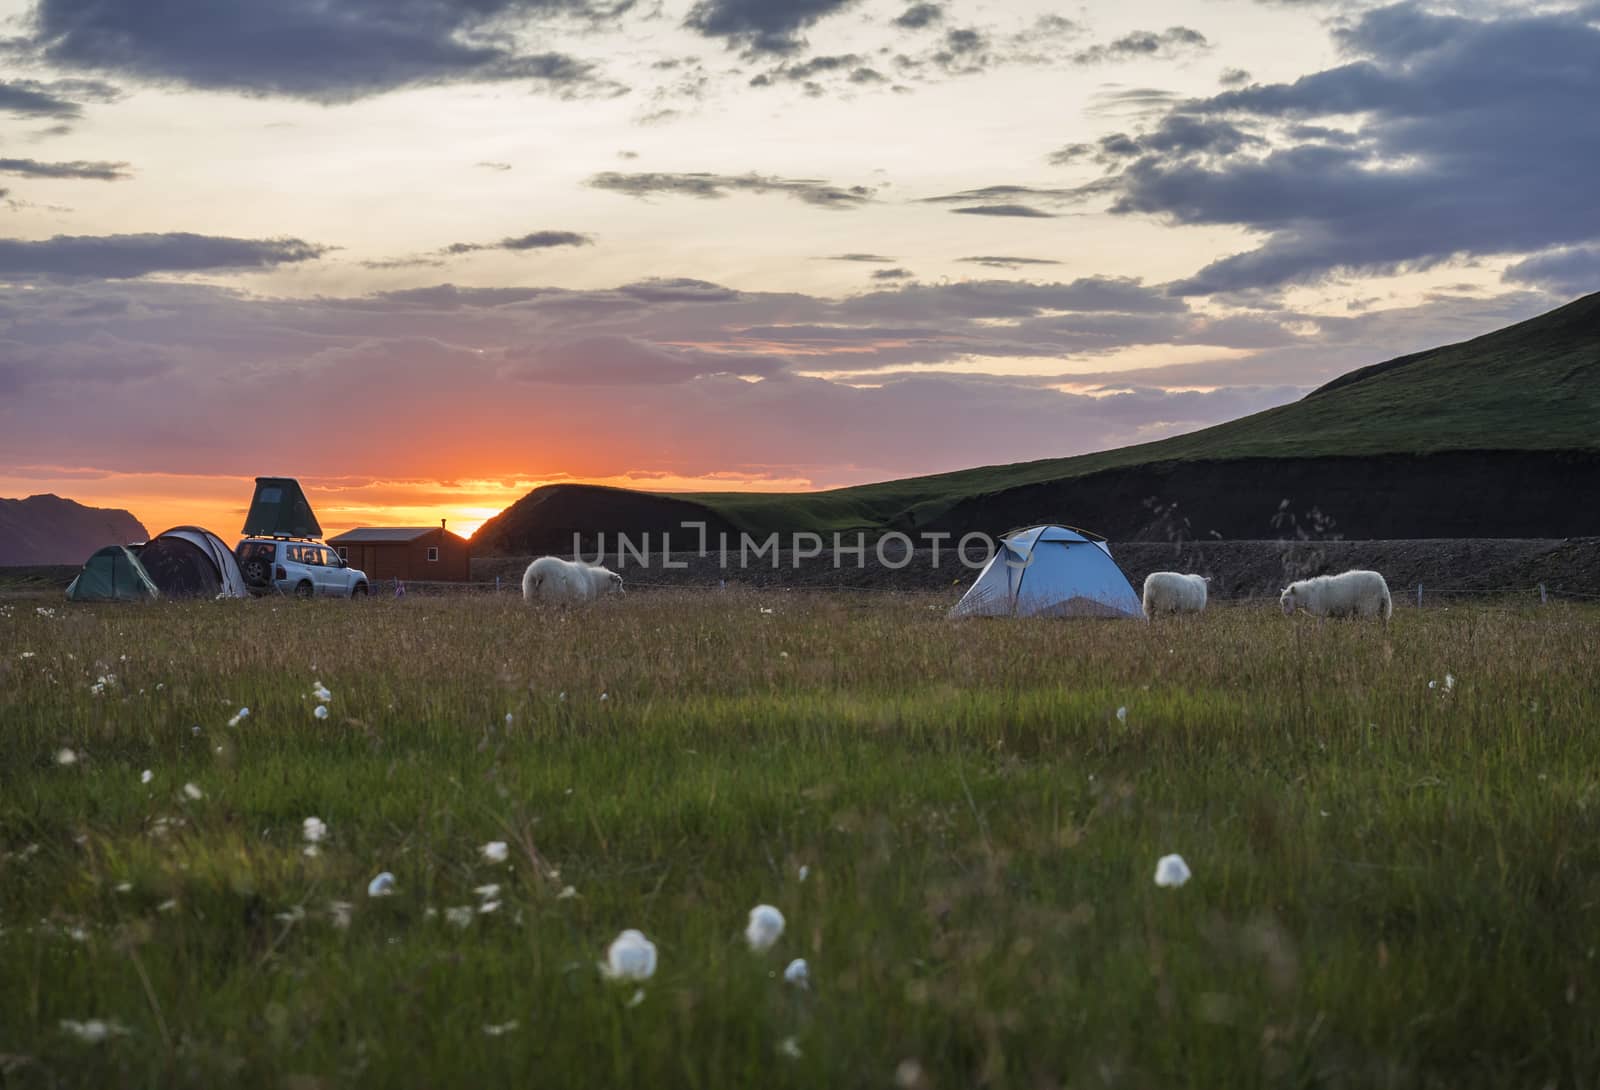 Beautiful red purple sunrise in Landmannalaugar mountain at camp site area with grazing sheep and tents. Fjallabak Nature Reserve in Highlands region of Iceland.